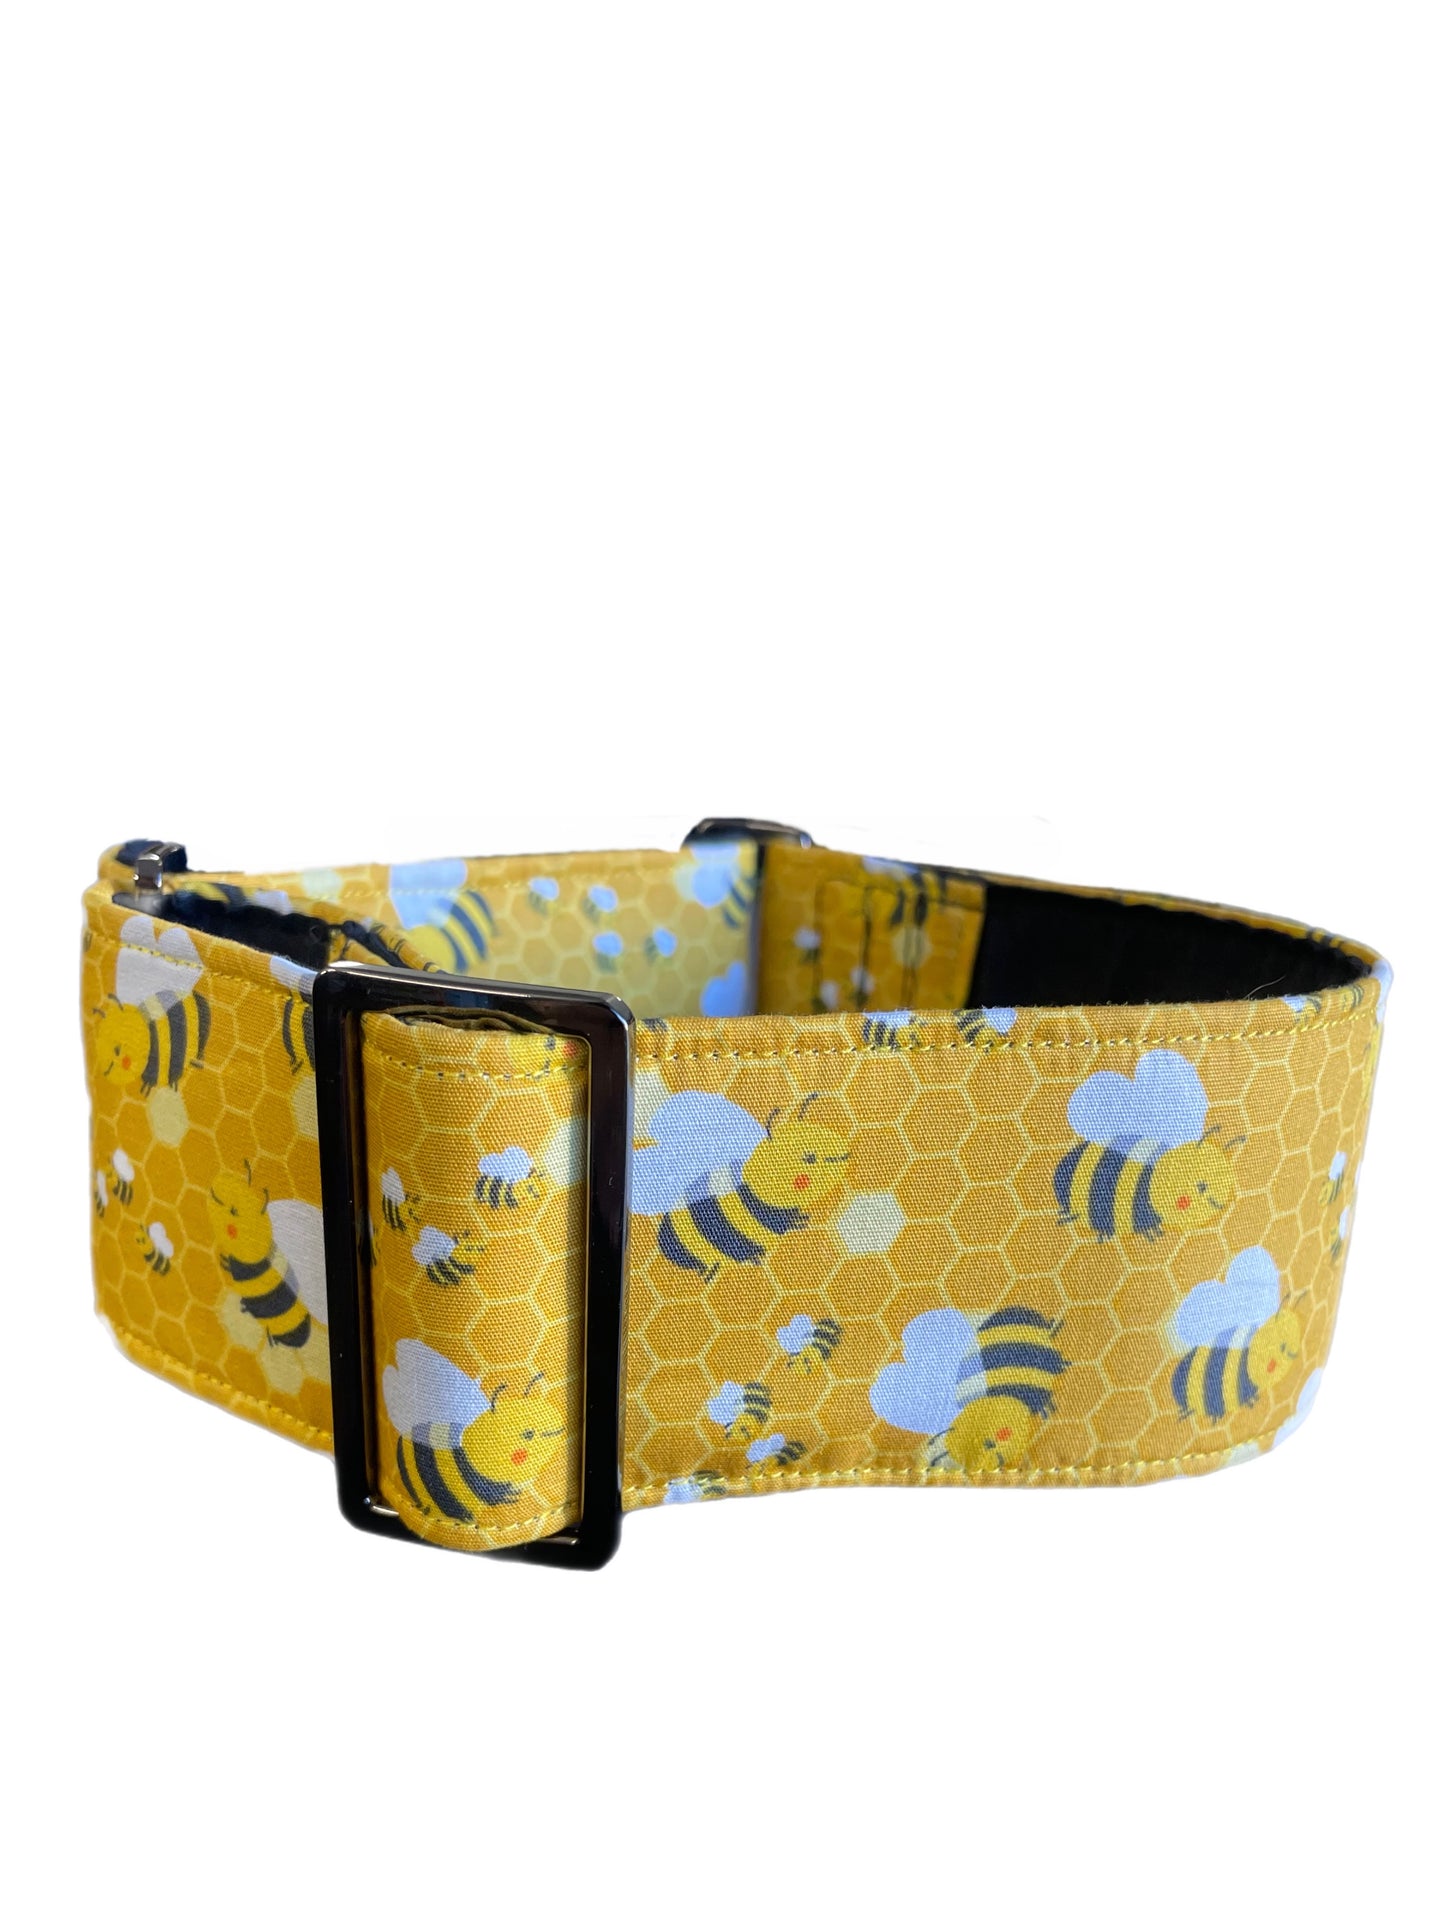 Bee happy yellow greyhound Martingale collar cotton covered 50mm width super soft